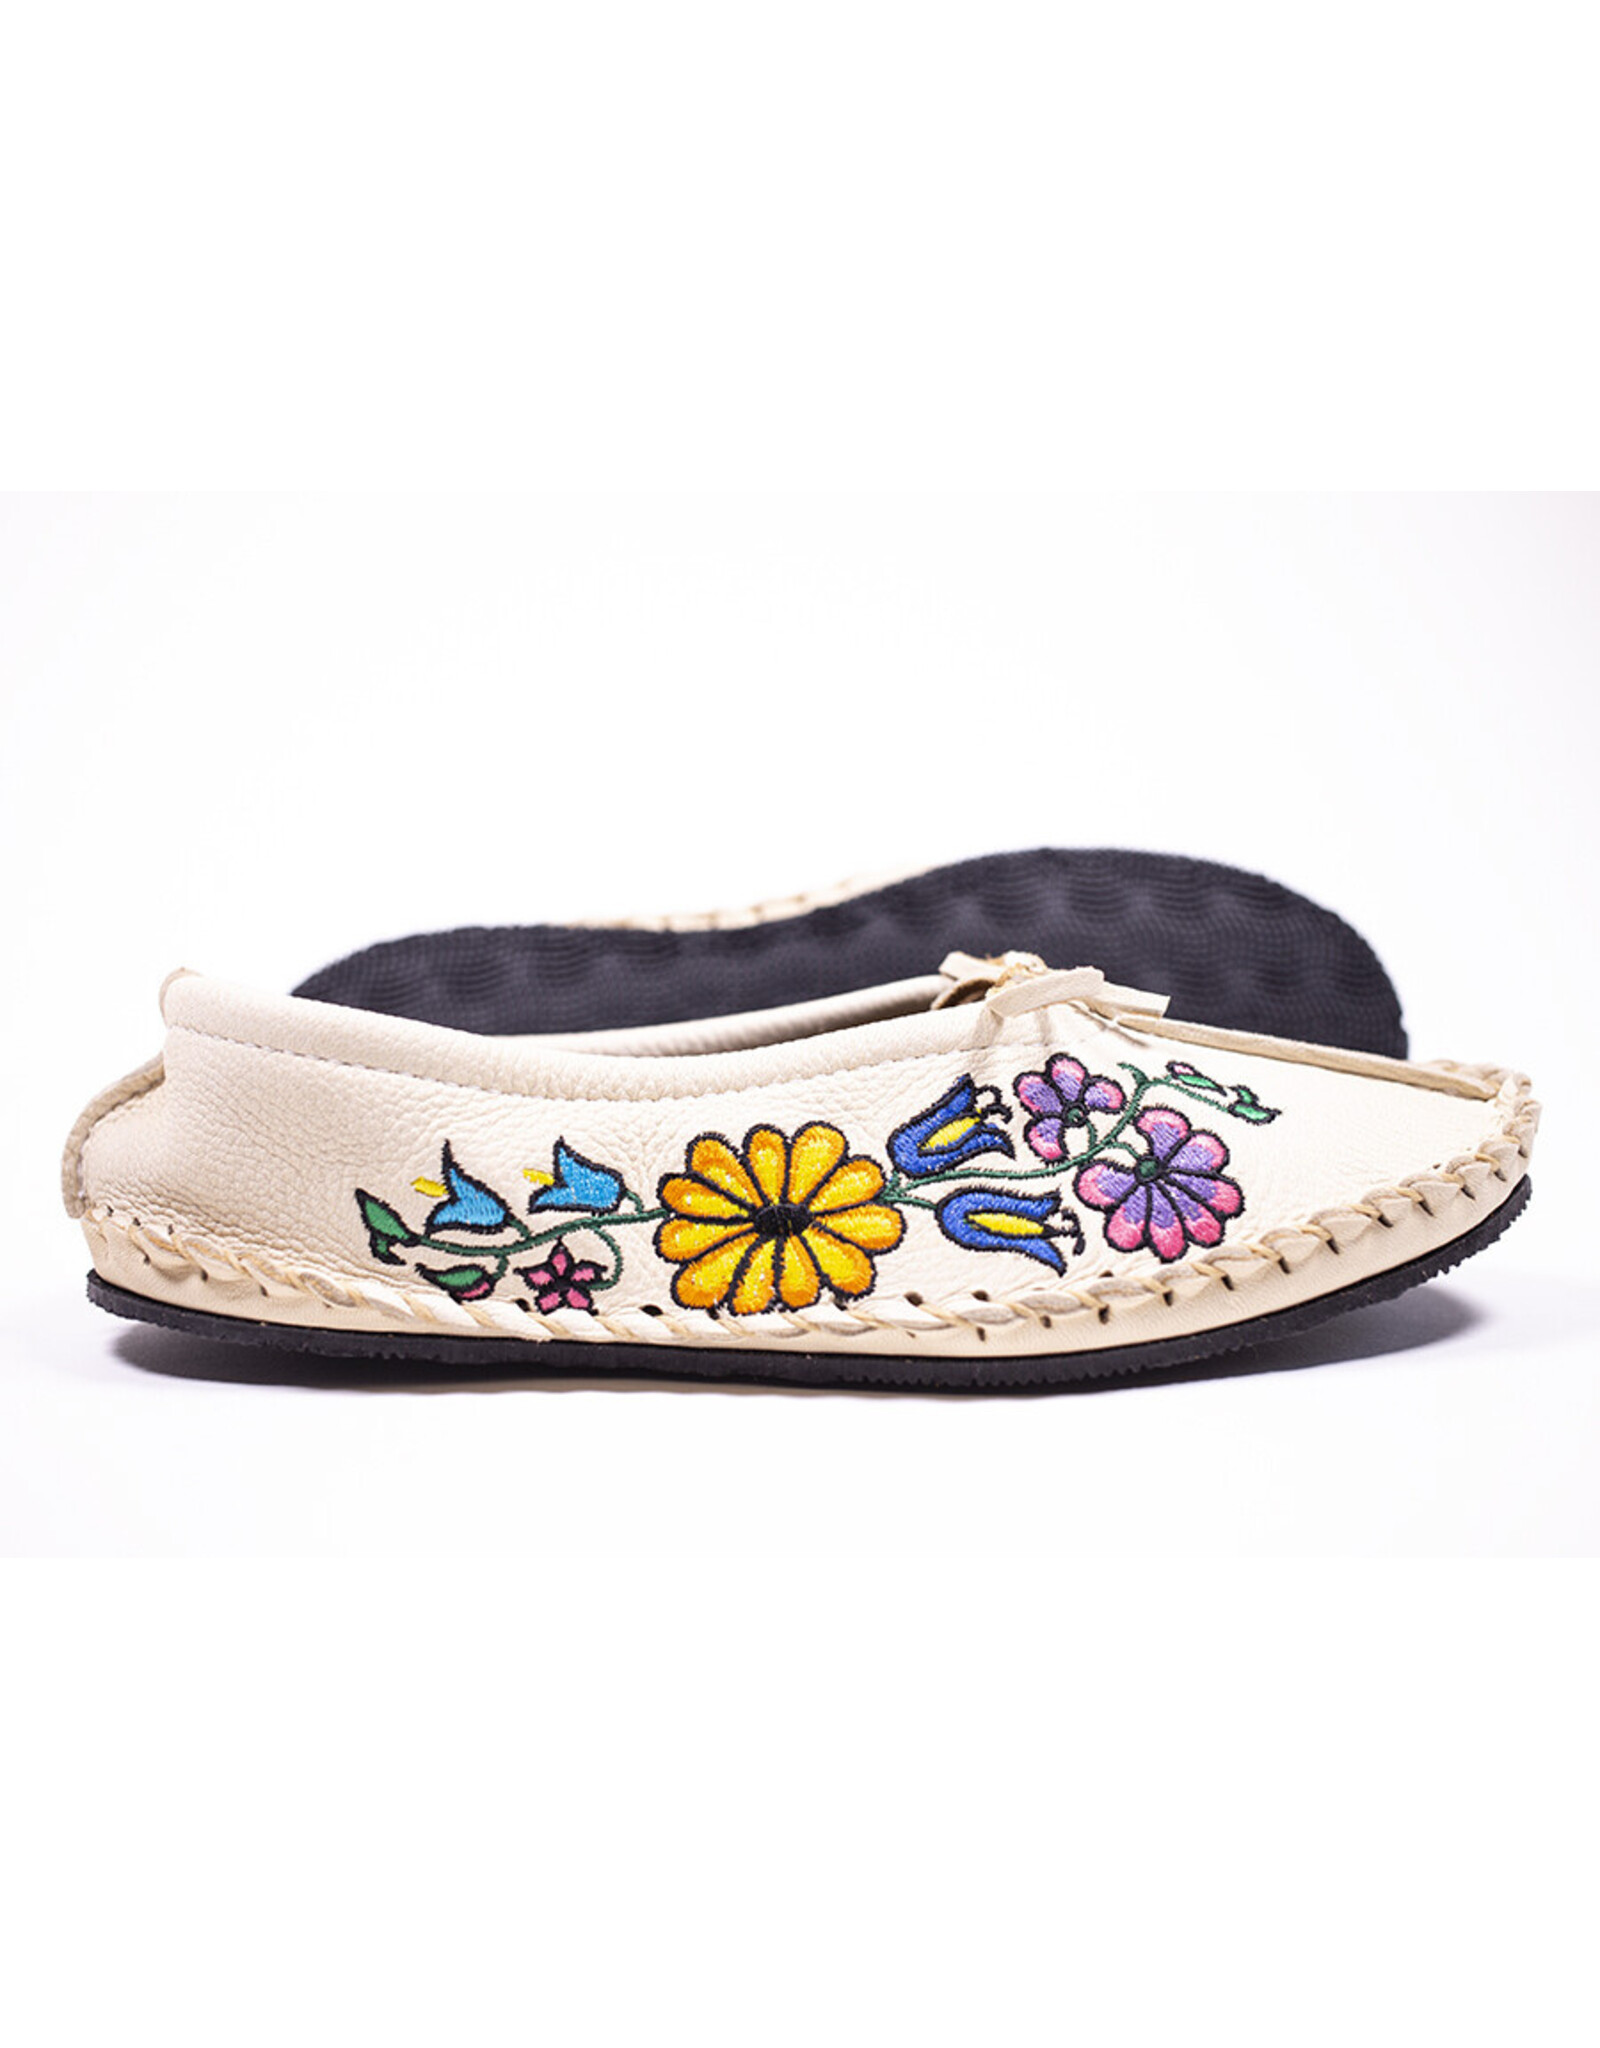 Deer Hide Moccasin with Sole & Floral Embroidery